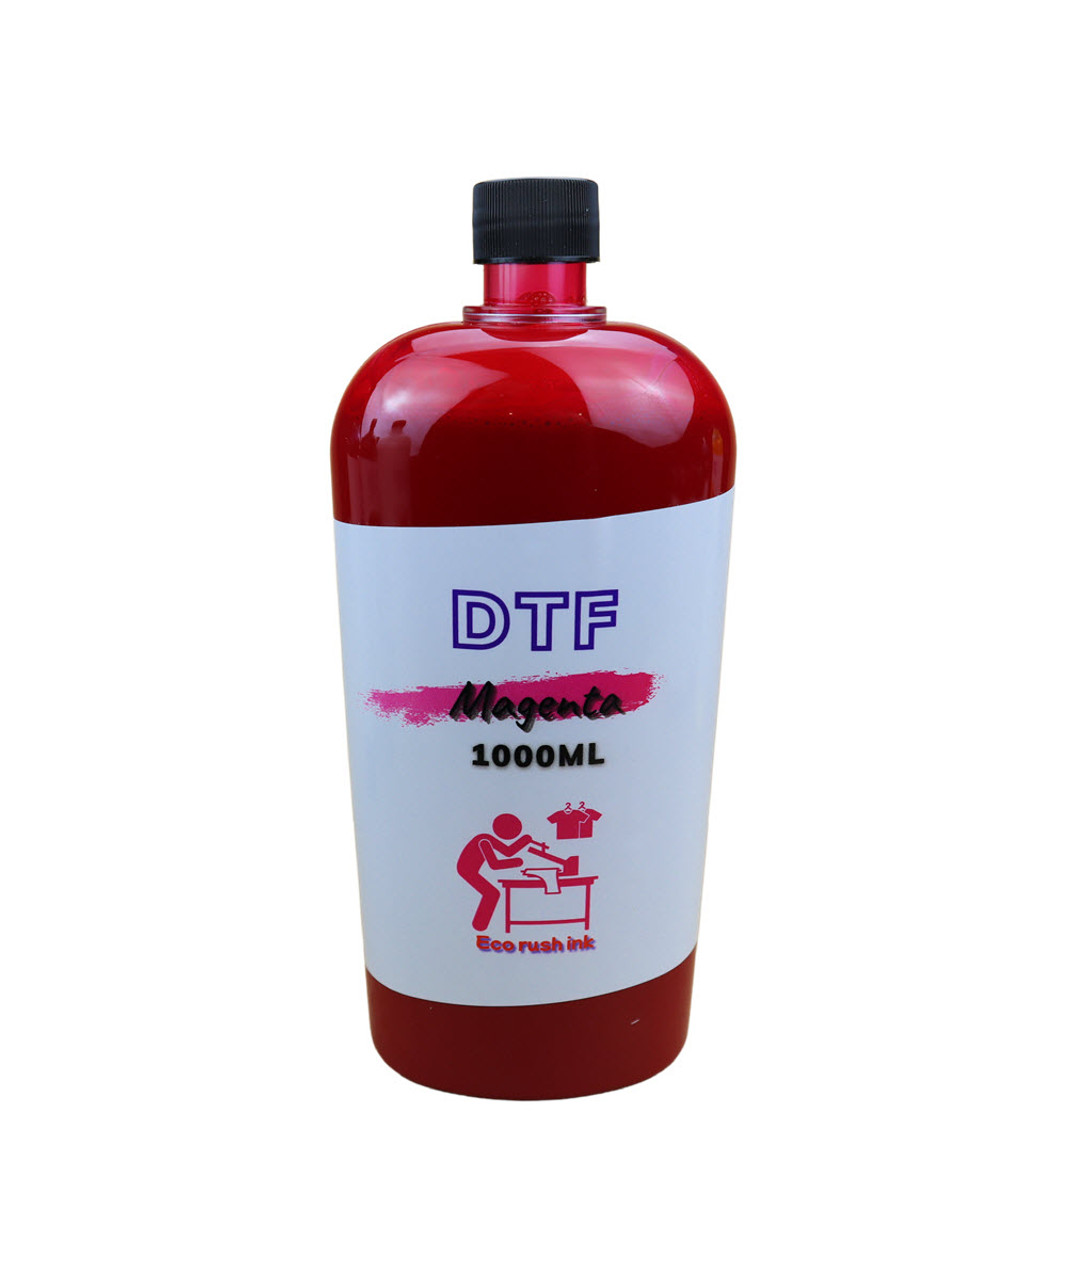 Magenta DTF Direct to Film Ink 1000ml Bottle for Epson Printers or printers with Epson Printhead